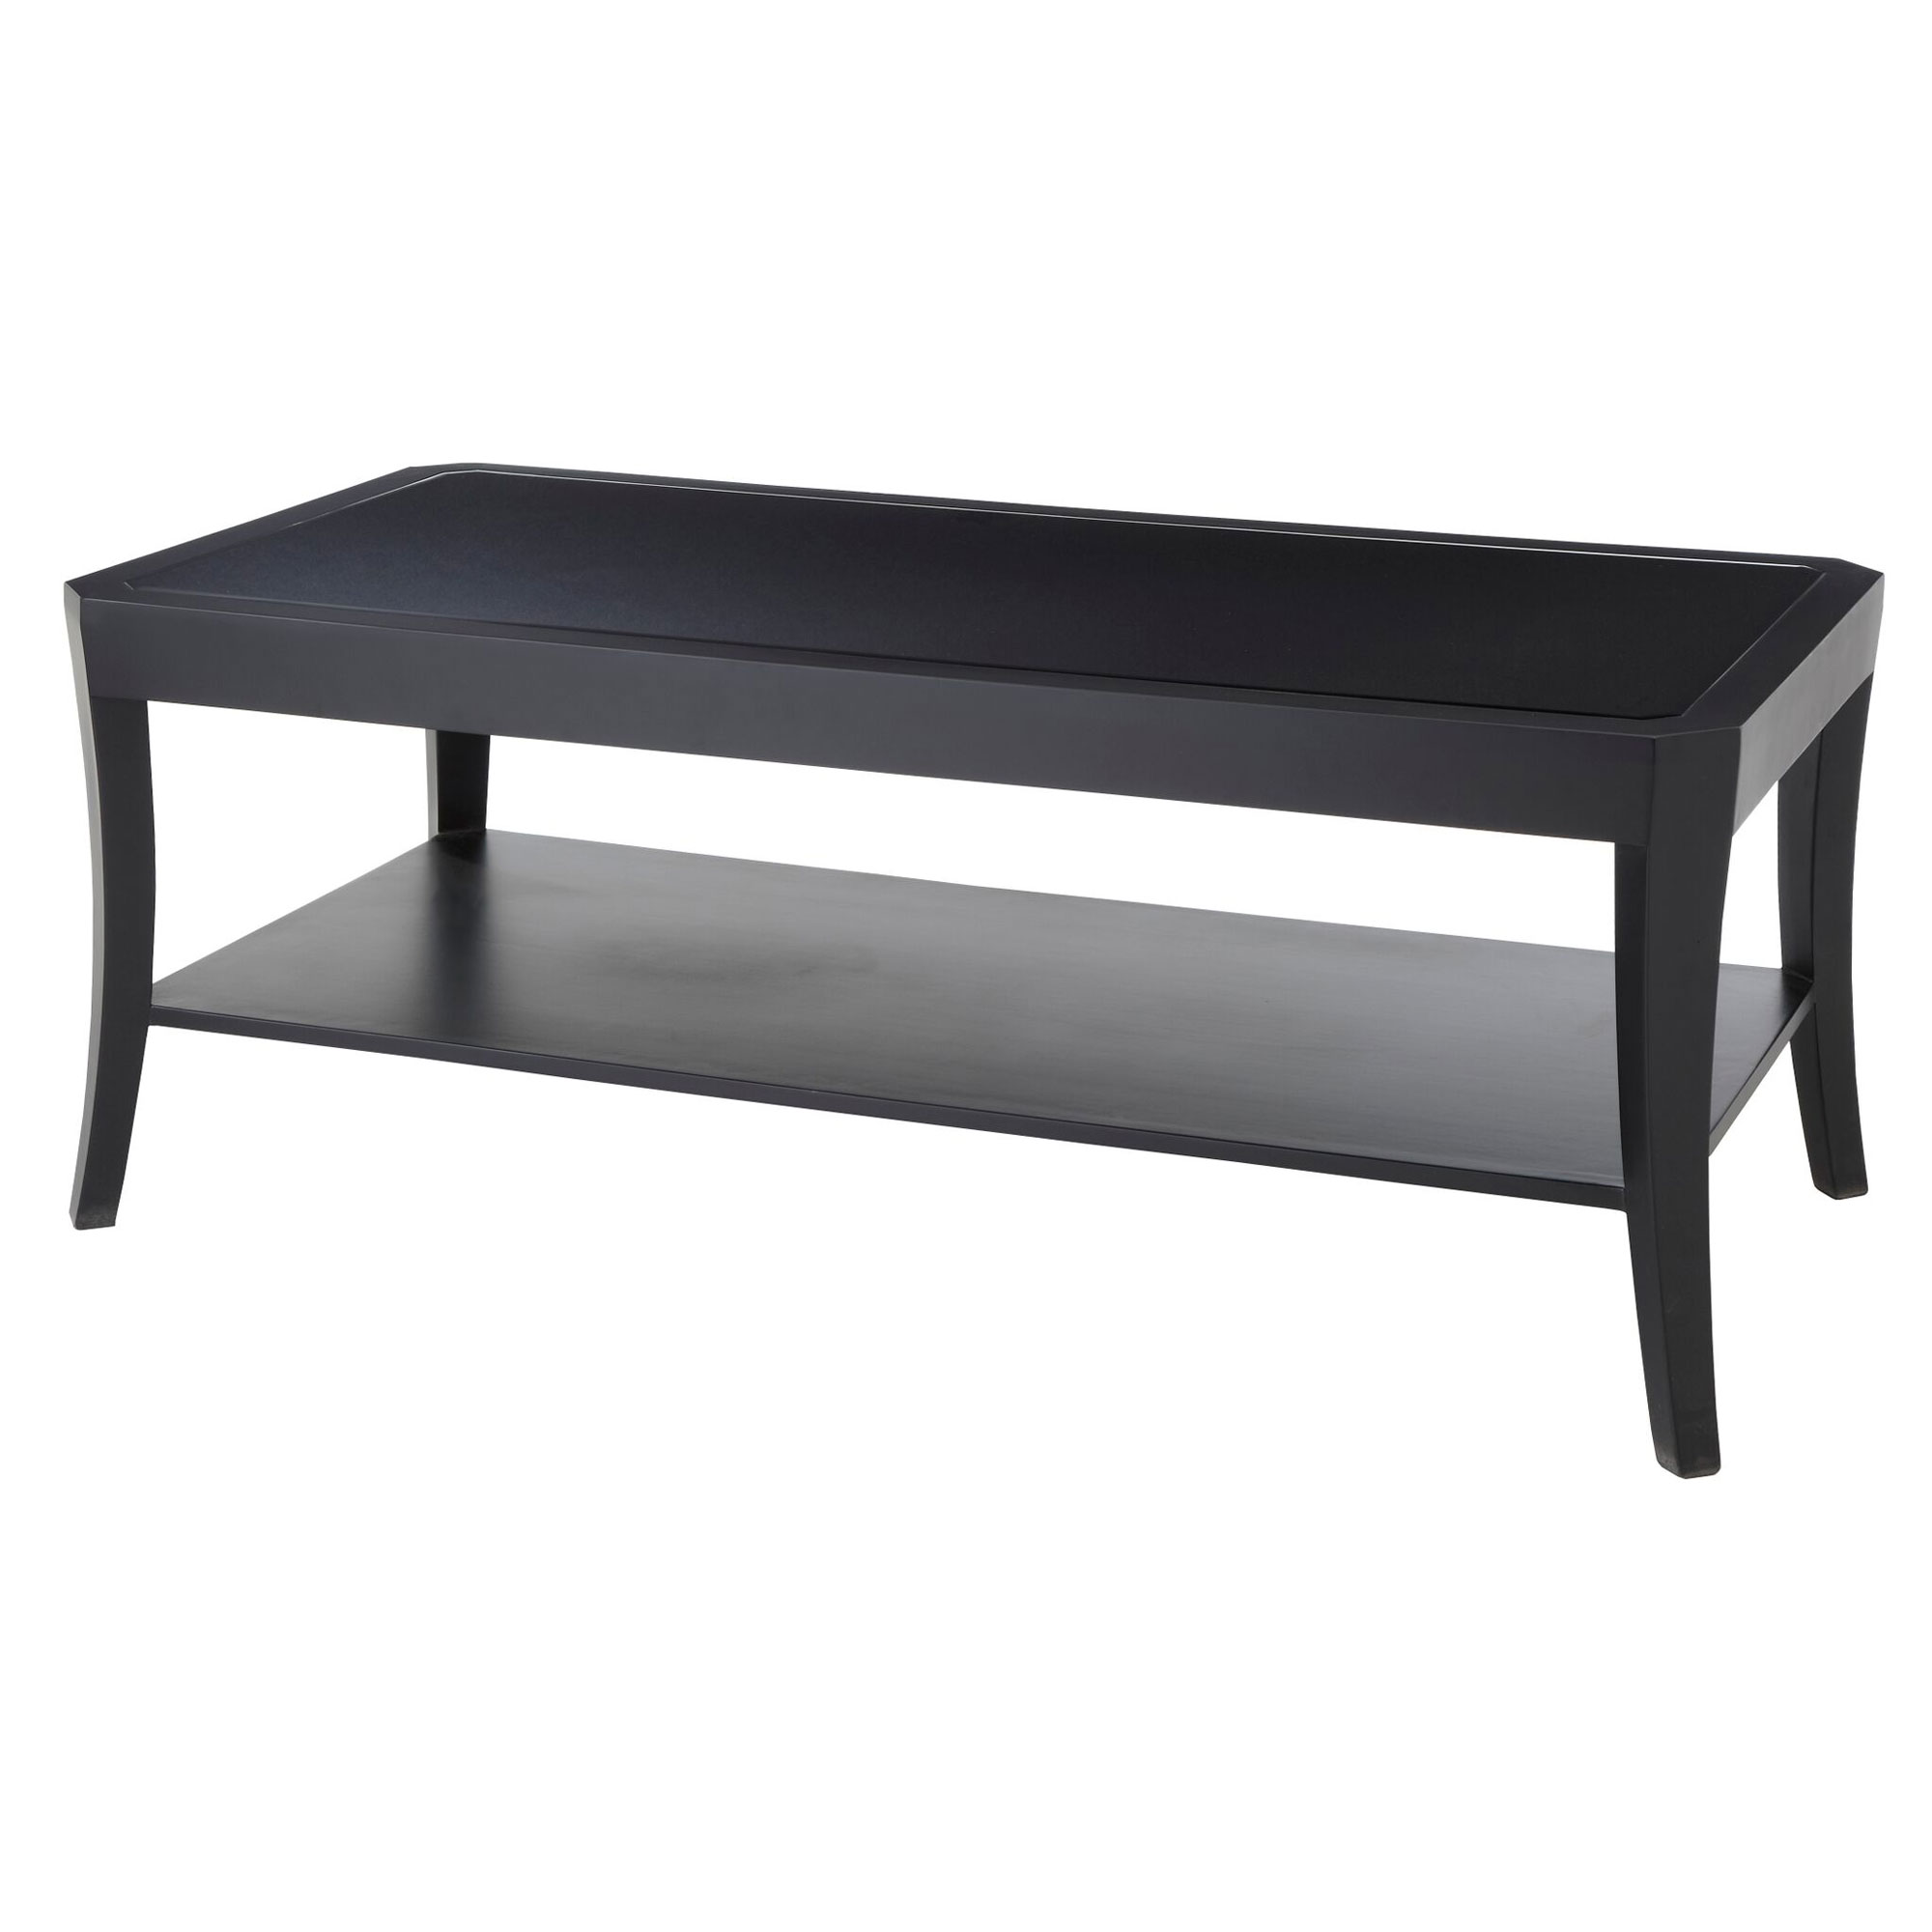 Hyde Coffee Table Black glass top